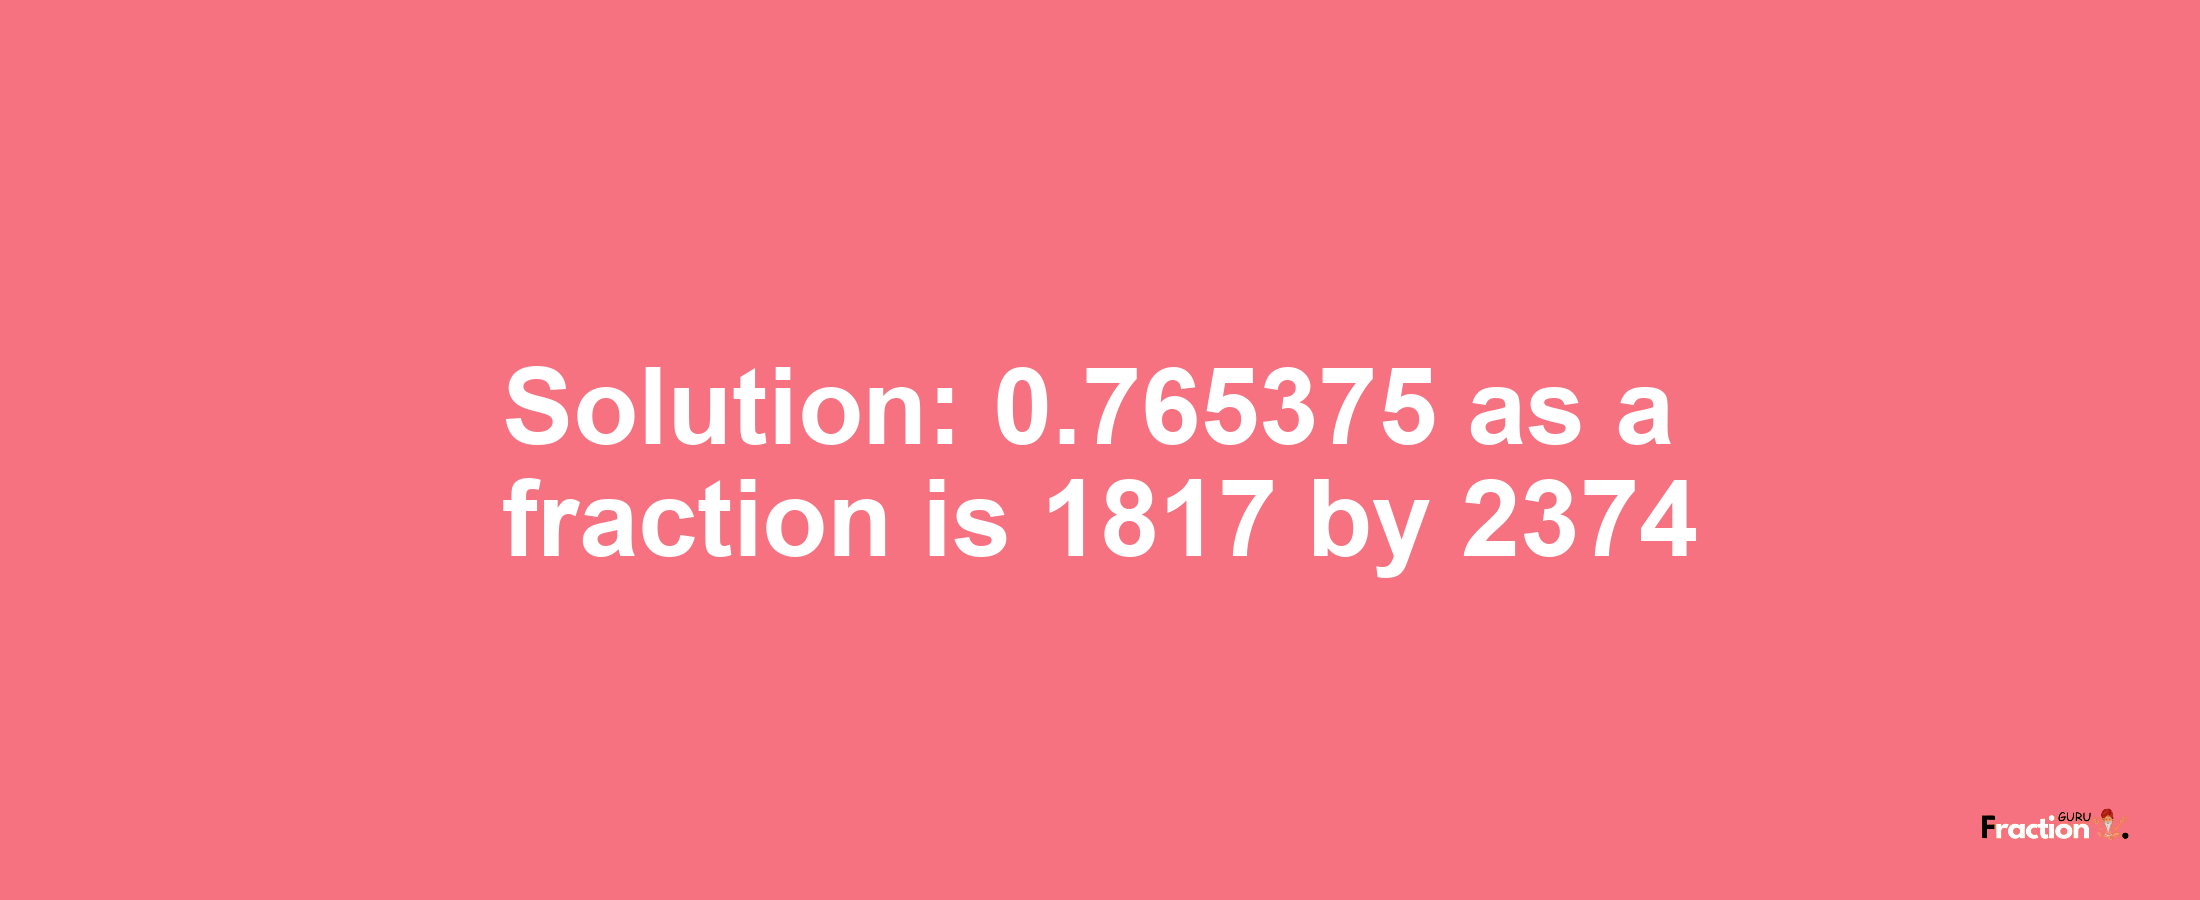 Solution:0.765375 as a fraction is 1817/2374